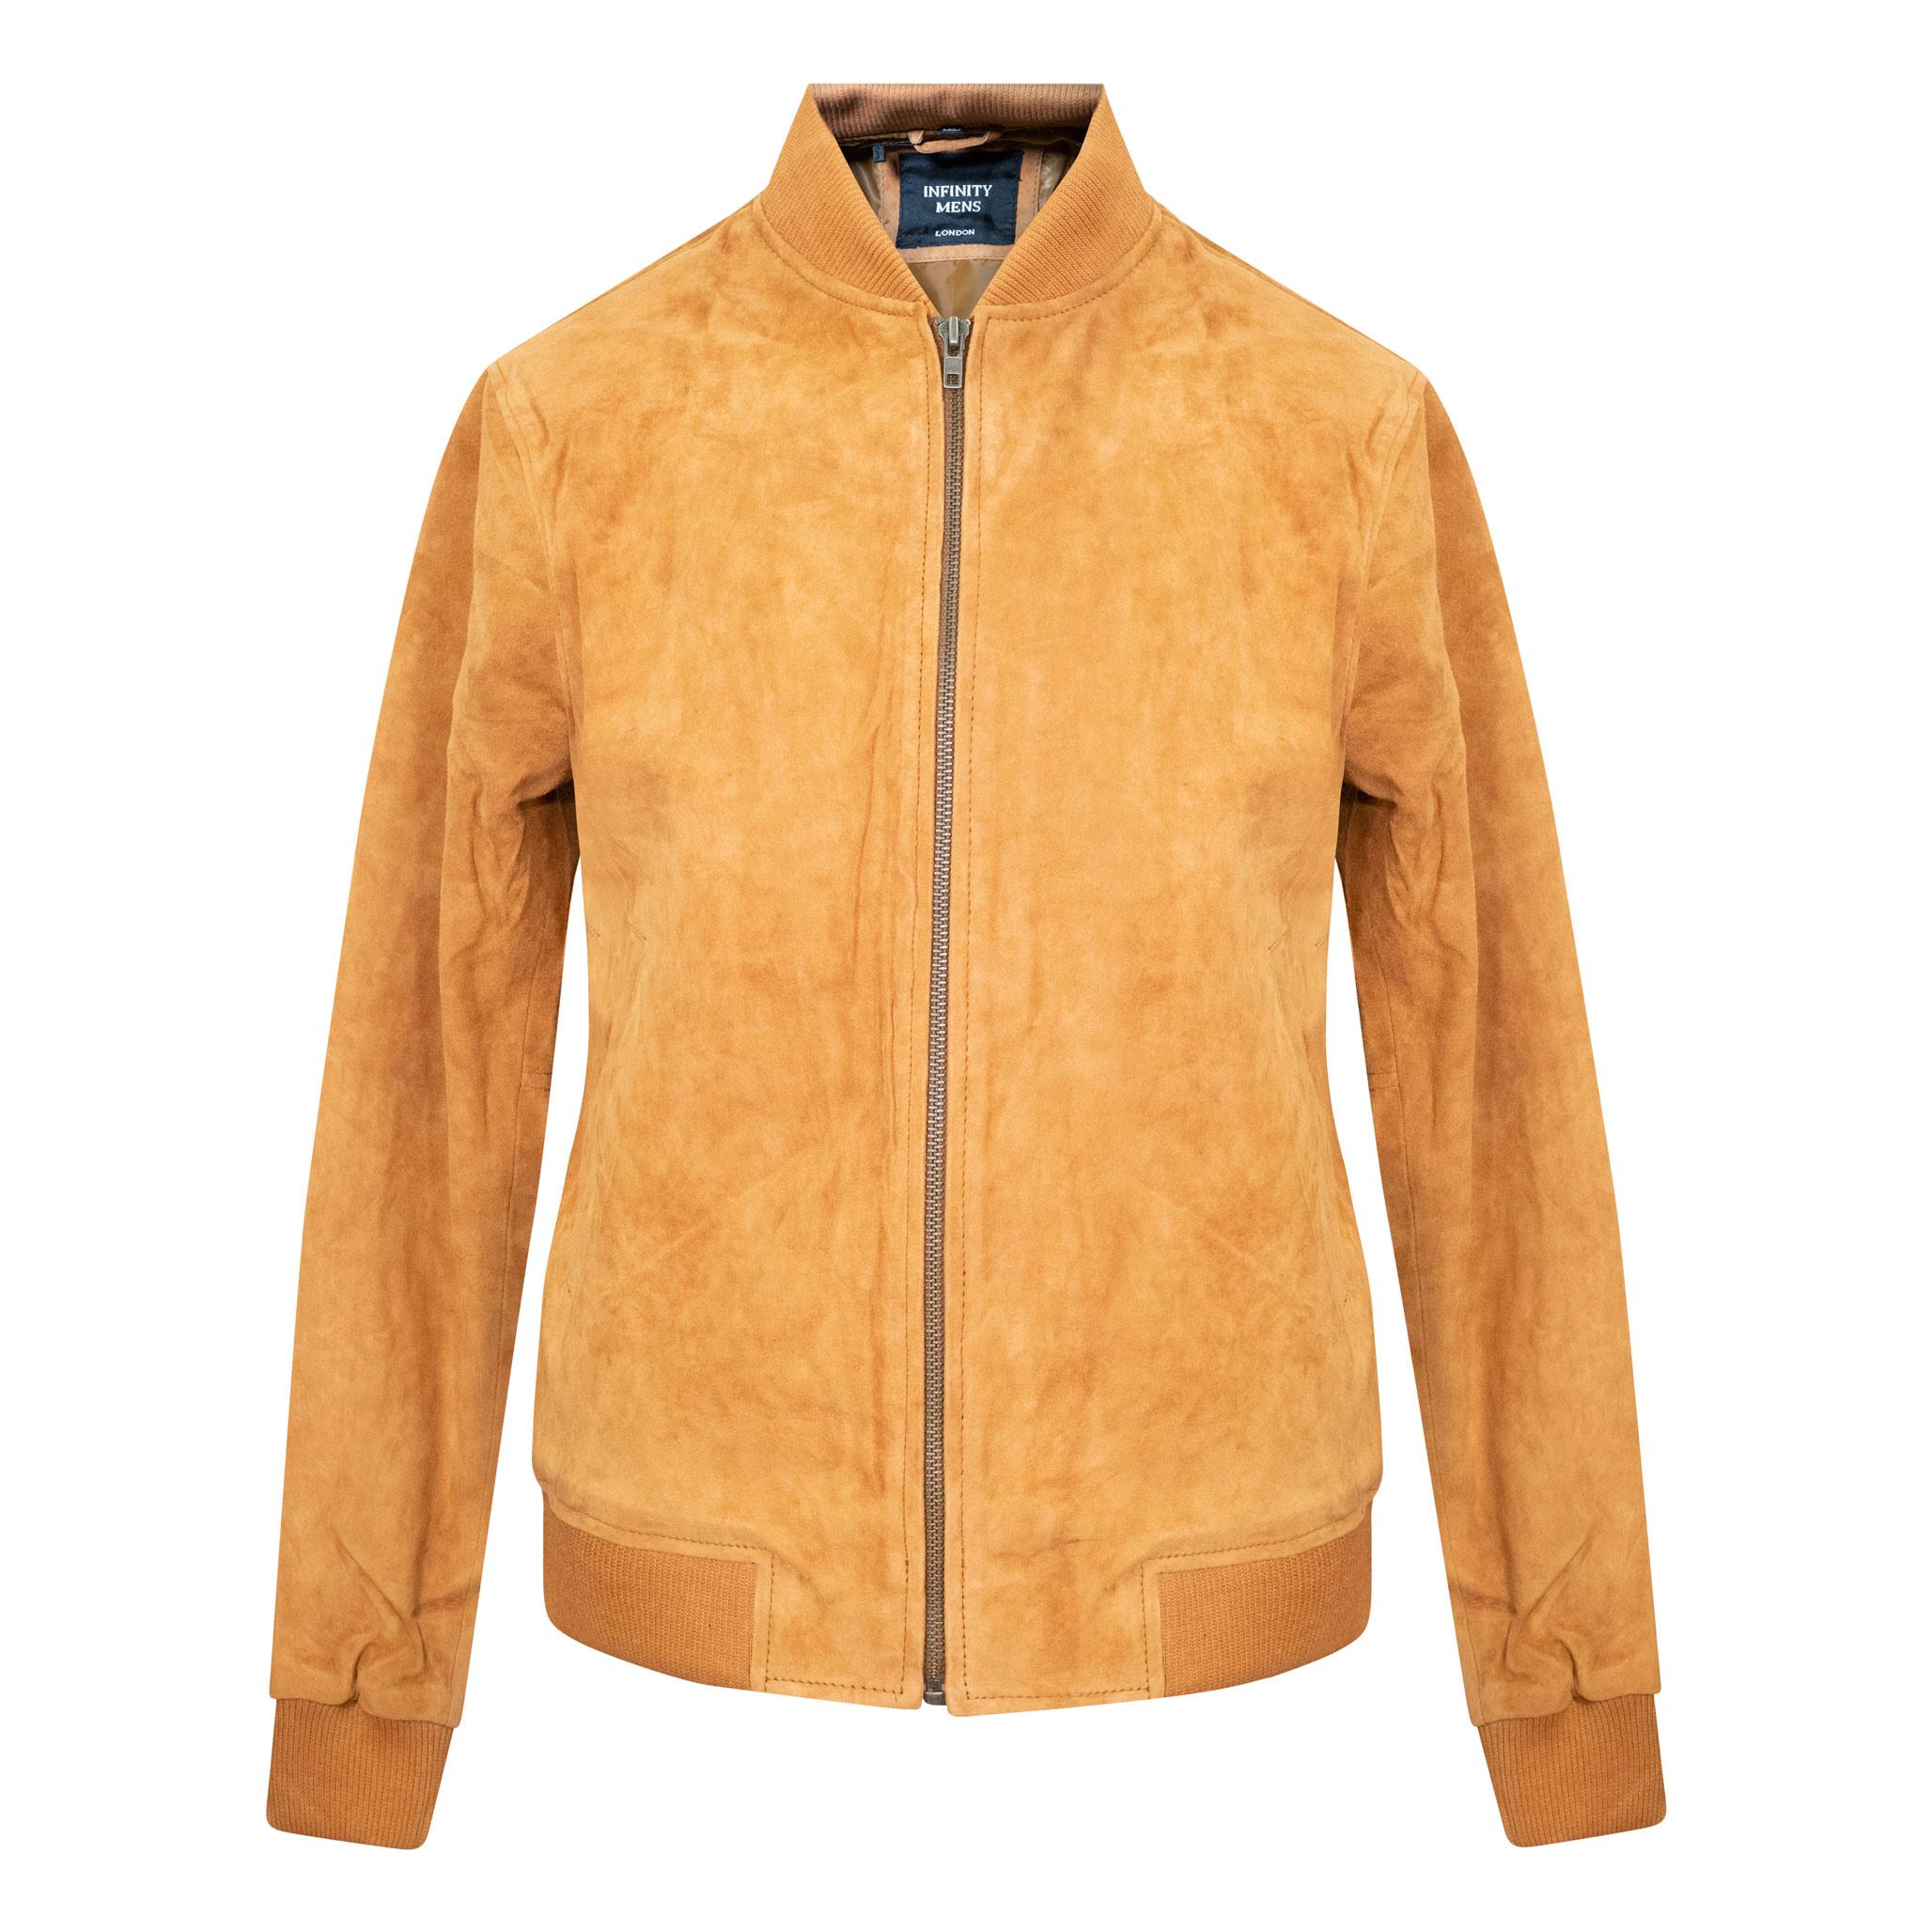 An elegant suede leather jacket in tan. Cuffed sleeved, and hem. Front zip closure.